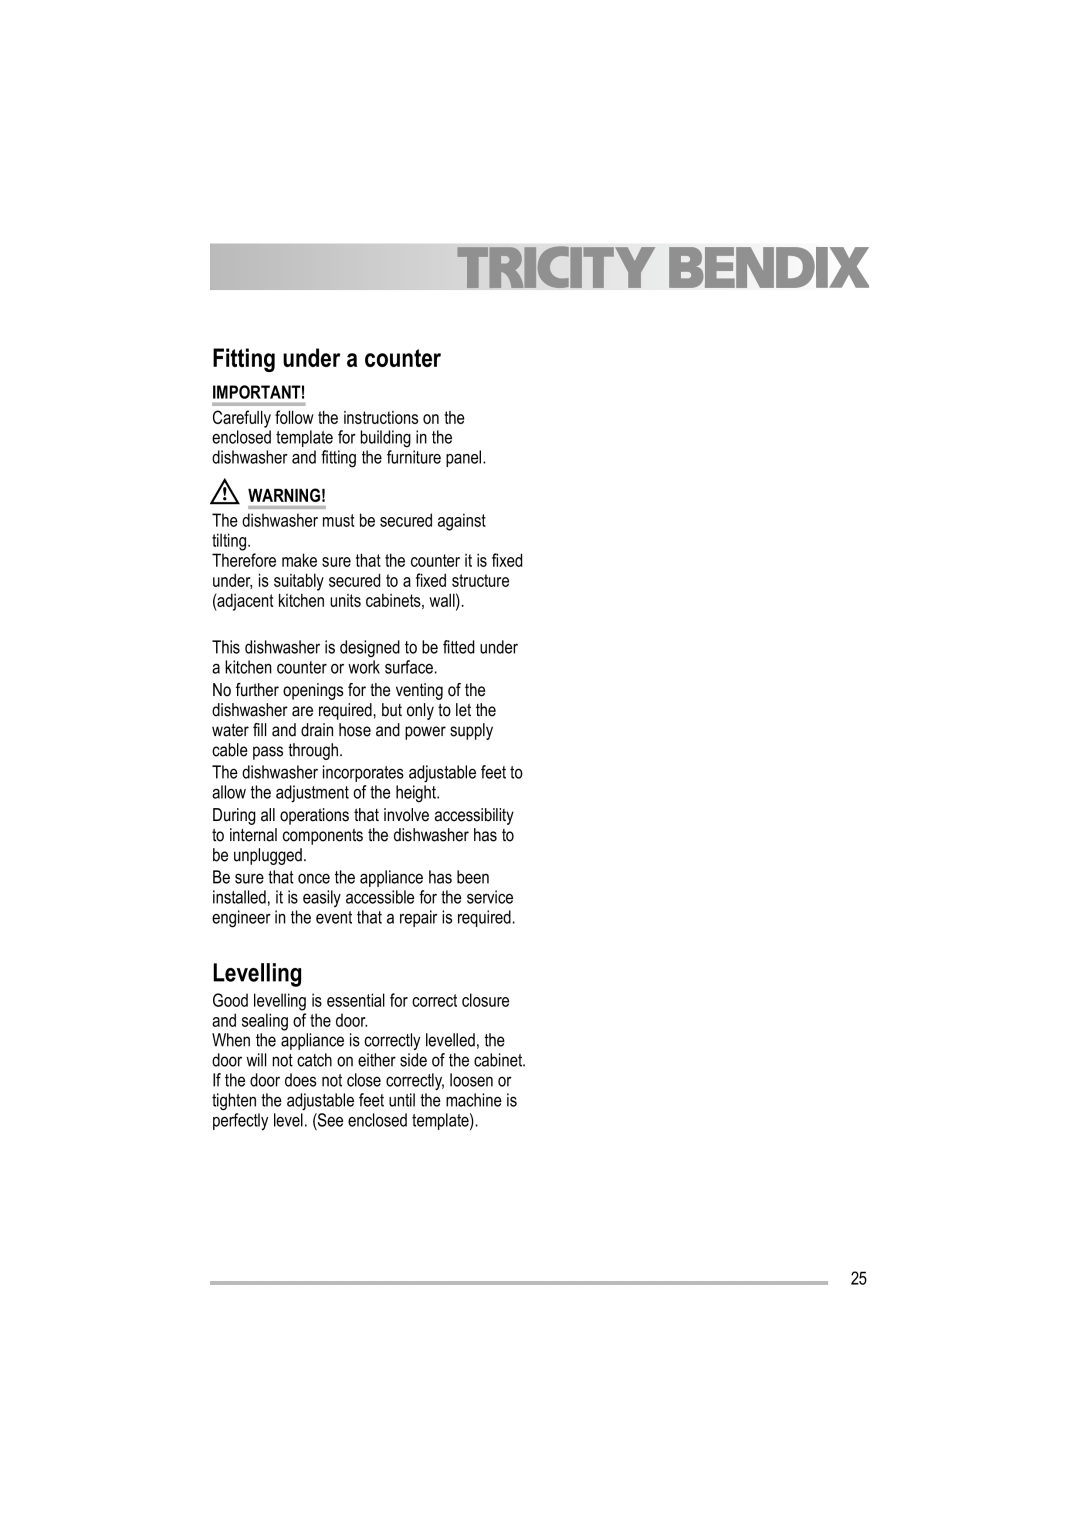 Tricity Bendix TBDW 32 manual Fitting under a counter, Levelling, The dishwasher must be secured against tilting 